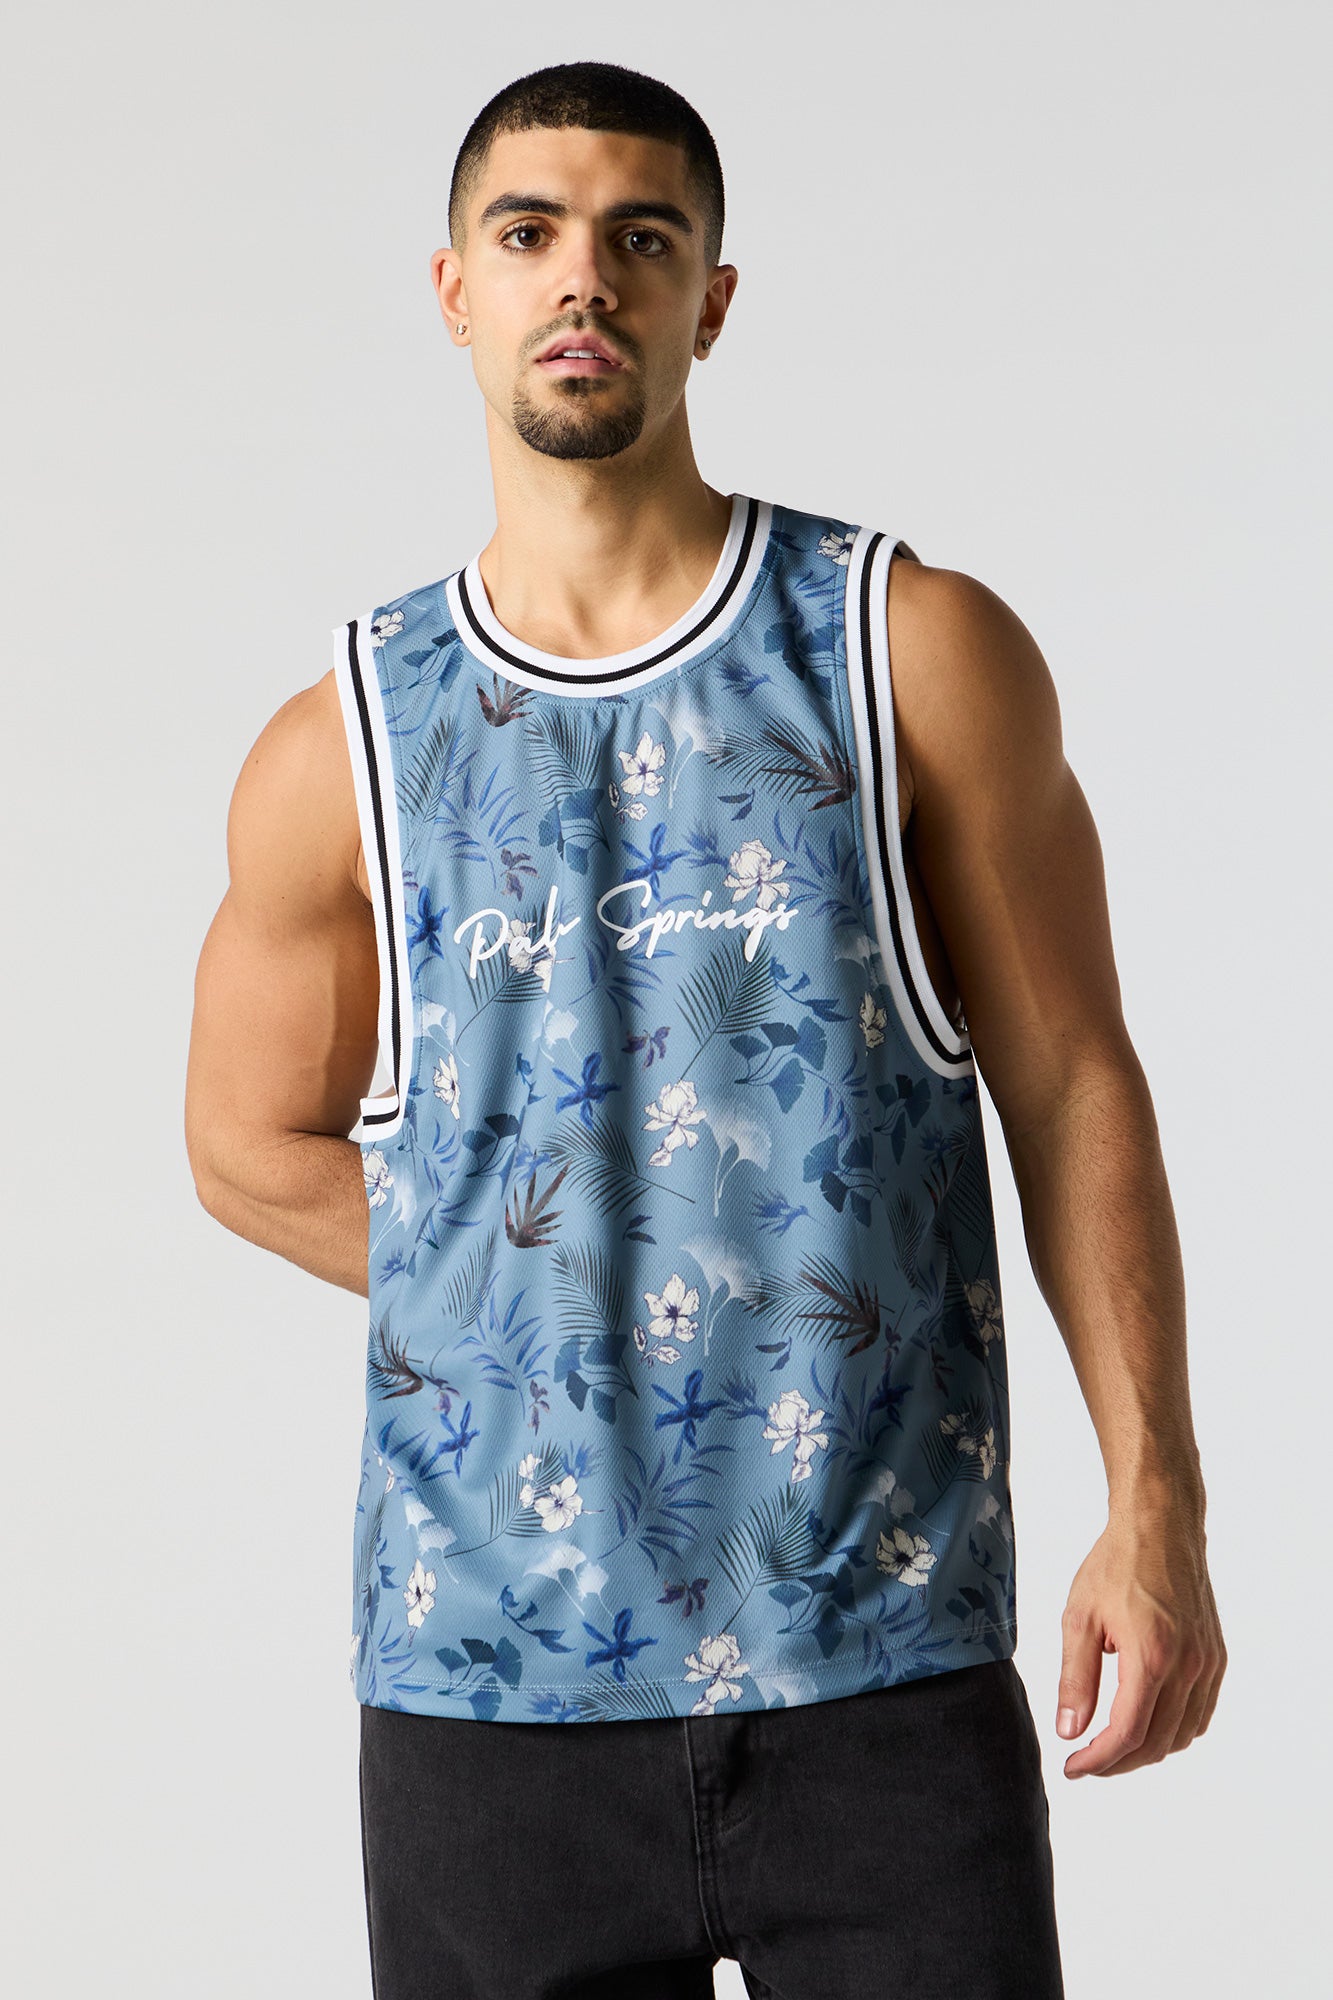 Floral Print Palm Springs Graphic Basketball Jersey